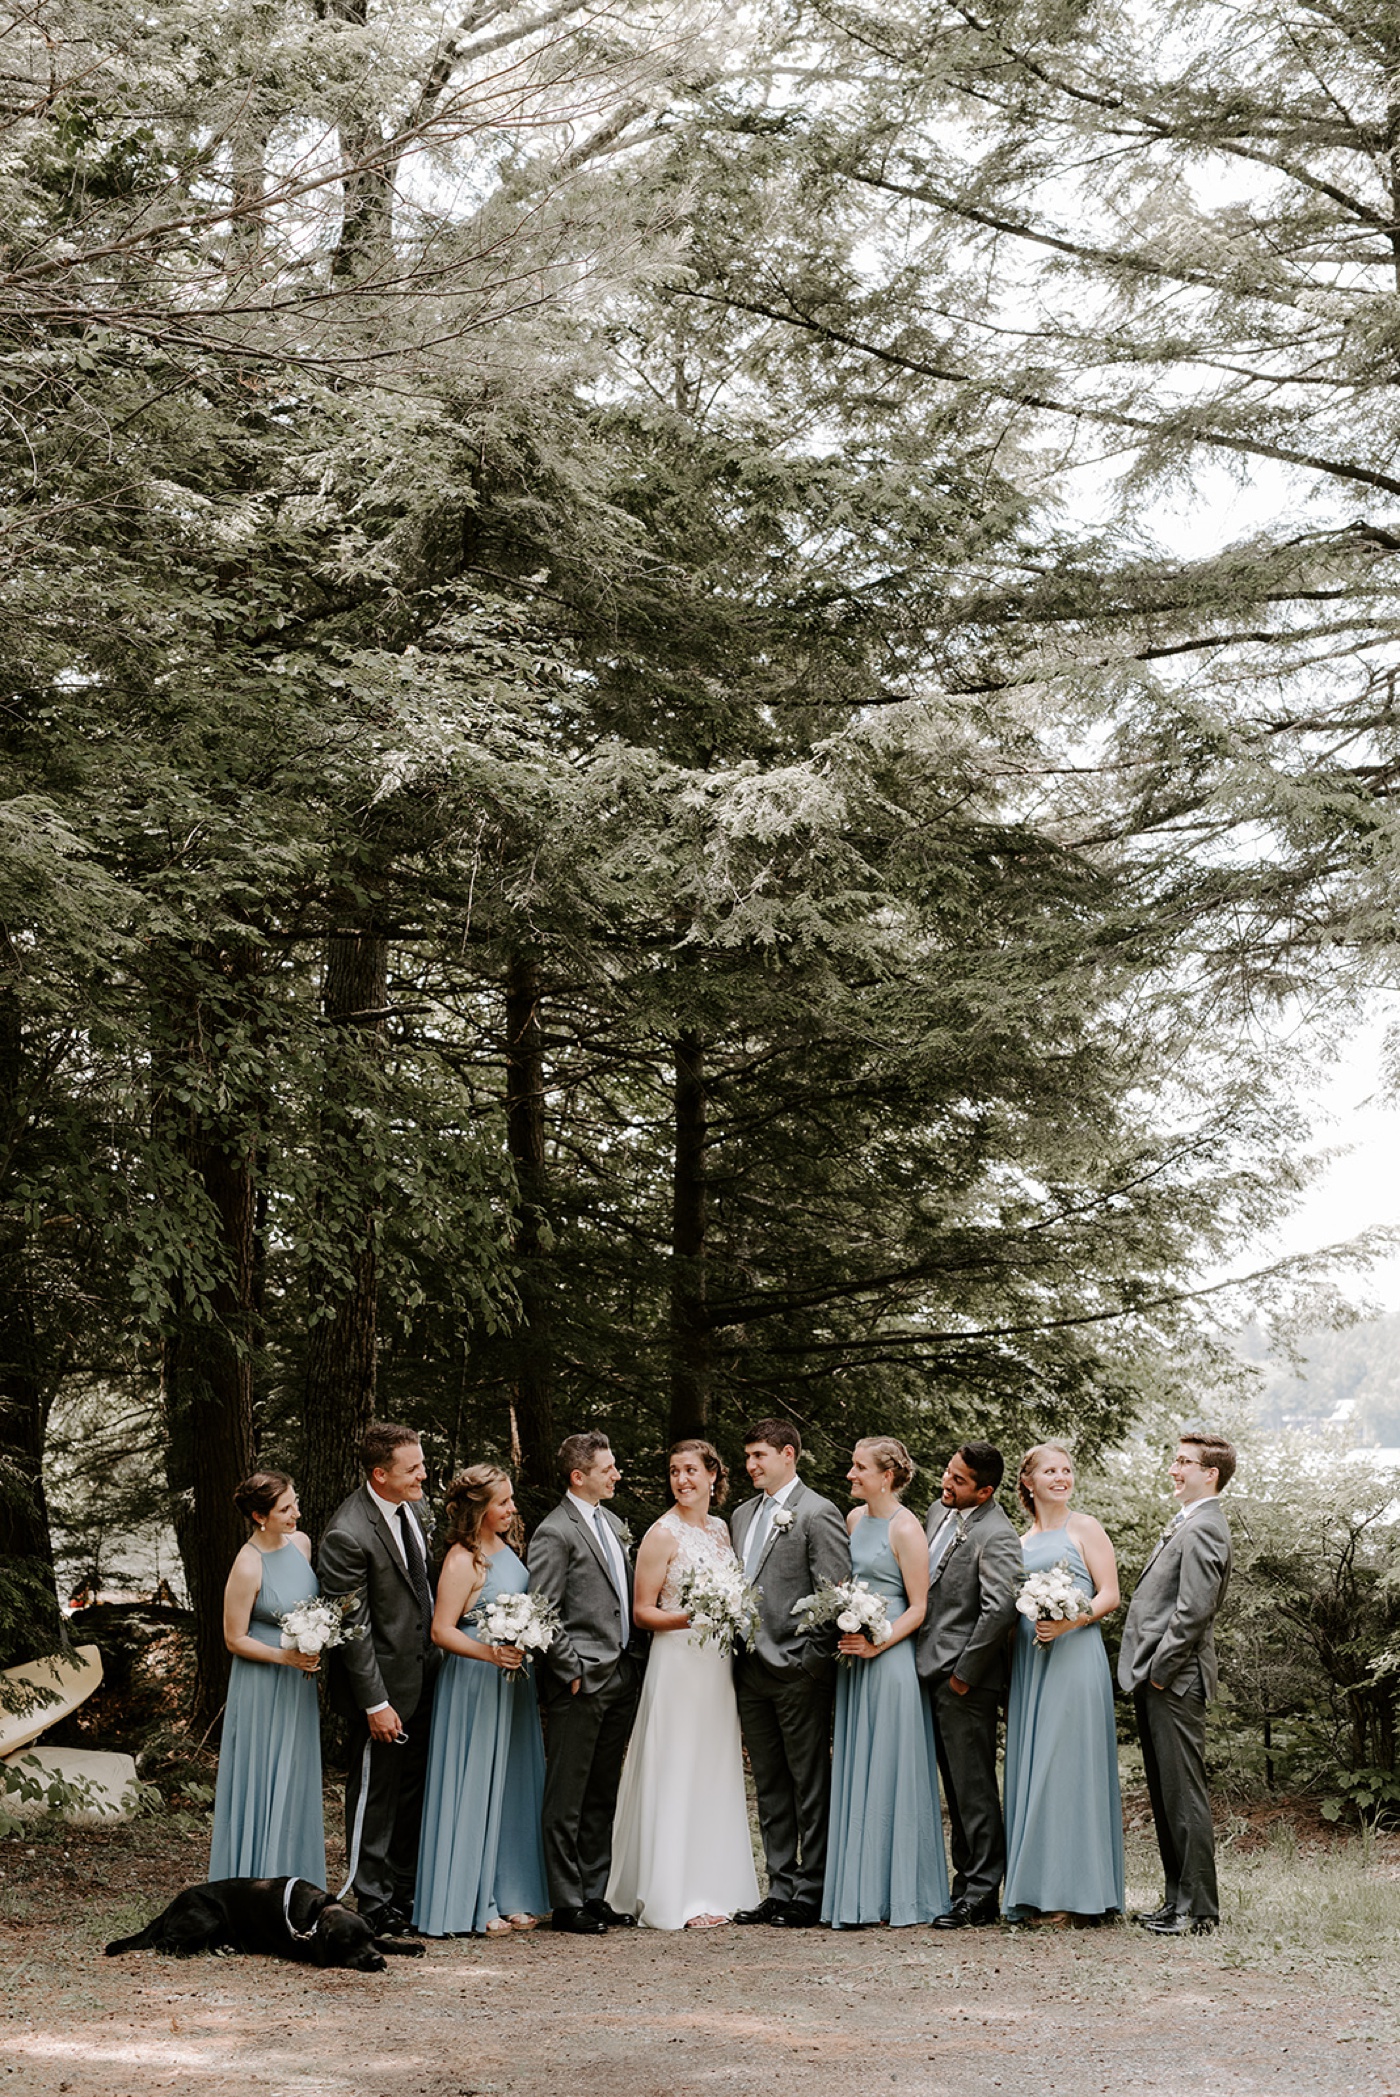 Bridal party portraits at a private lake property in New Hampshire